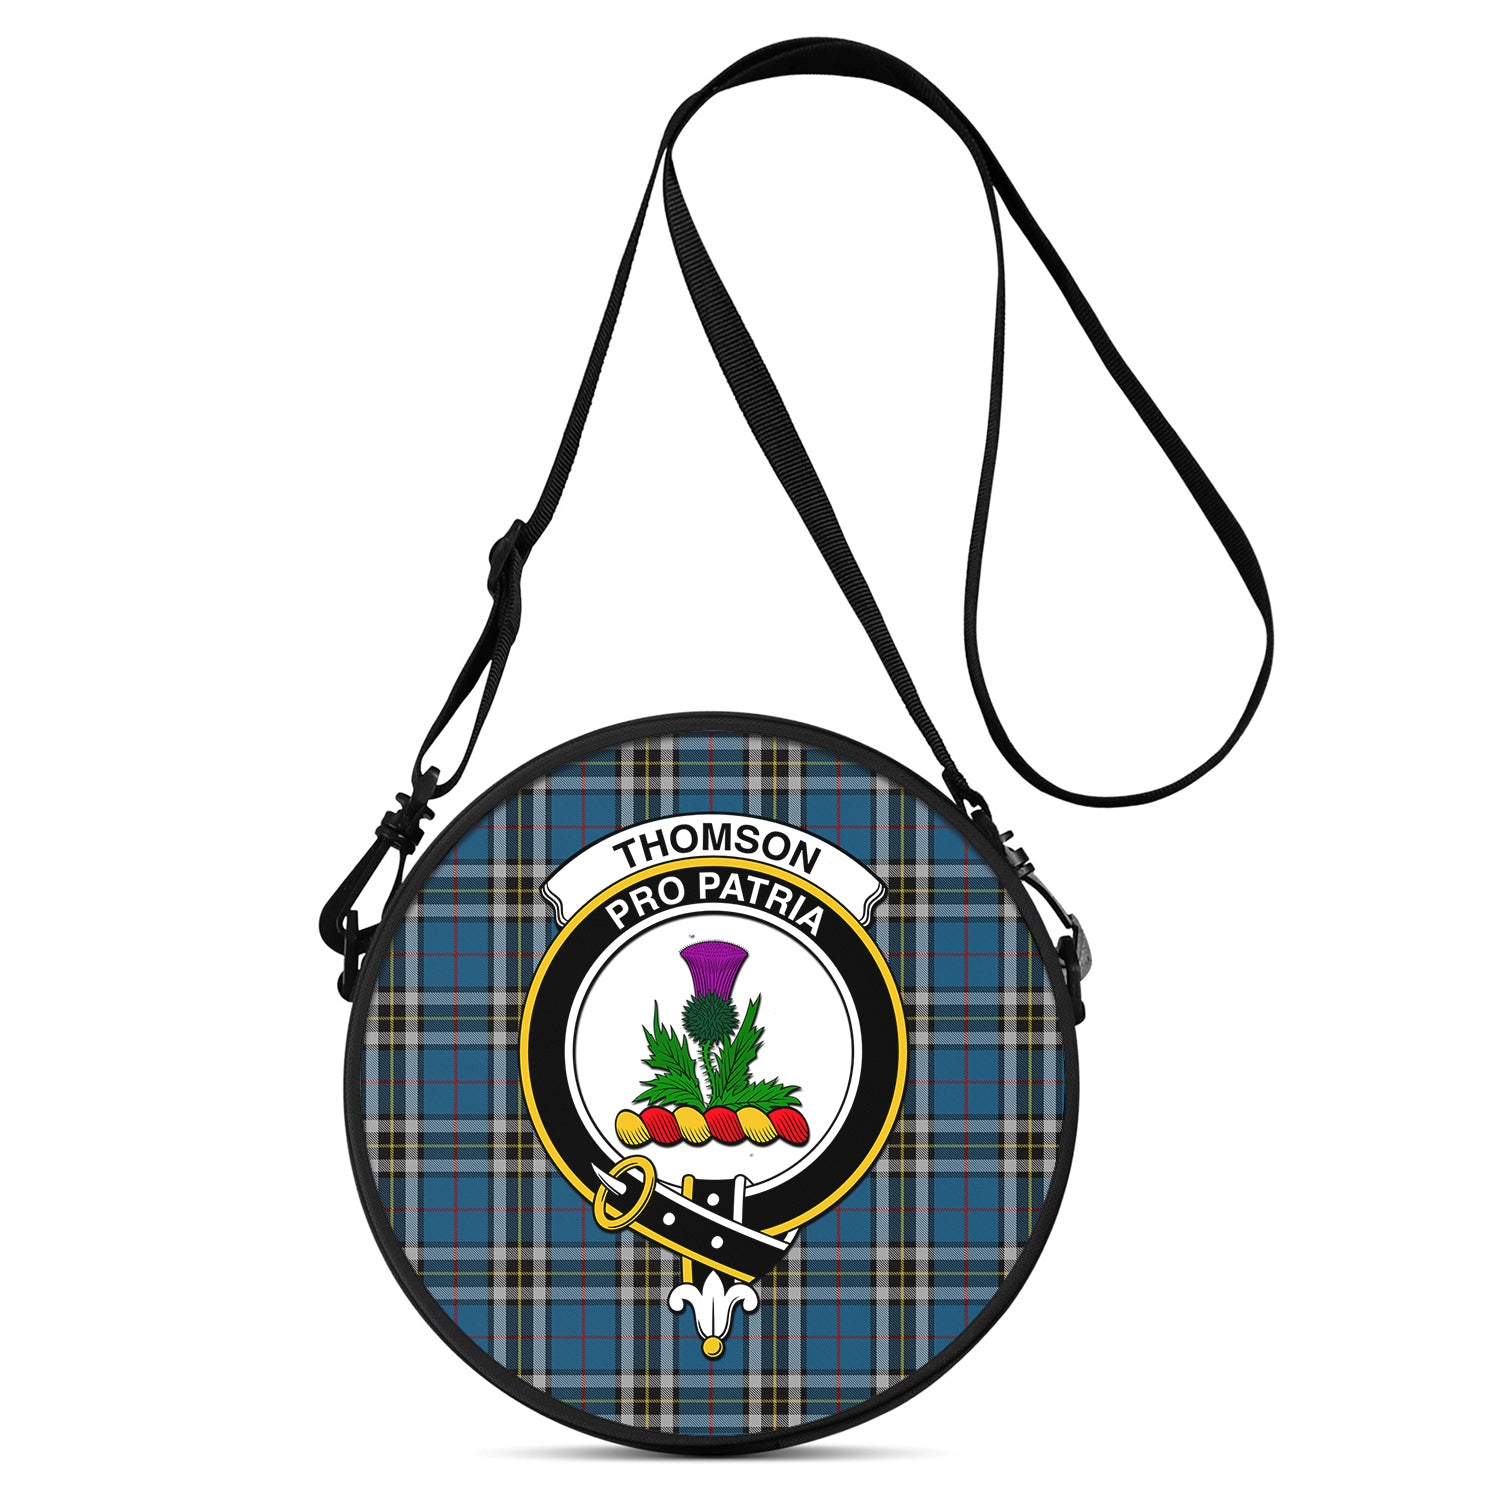 thomson-dress-blue-tartan-round-satchel-bags-with-family-crest